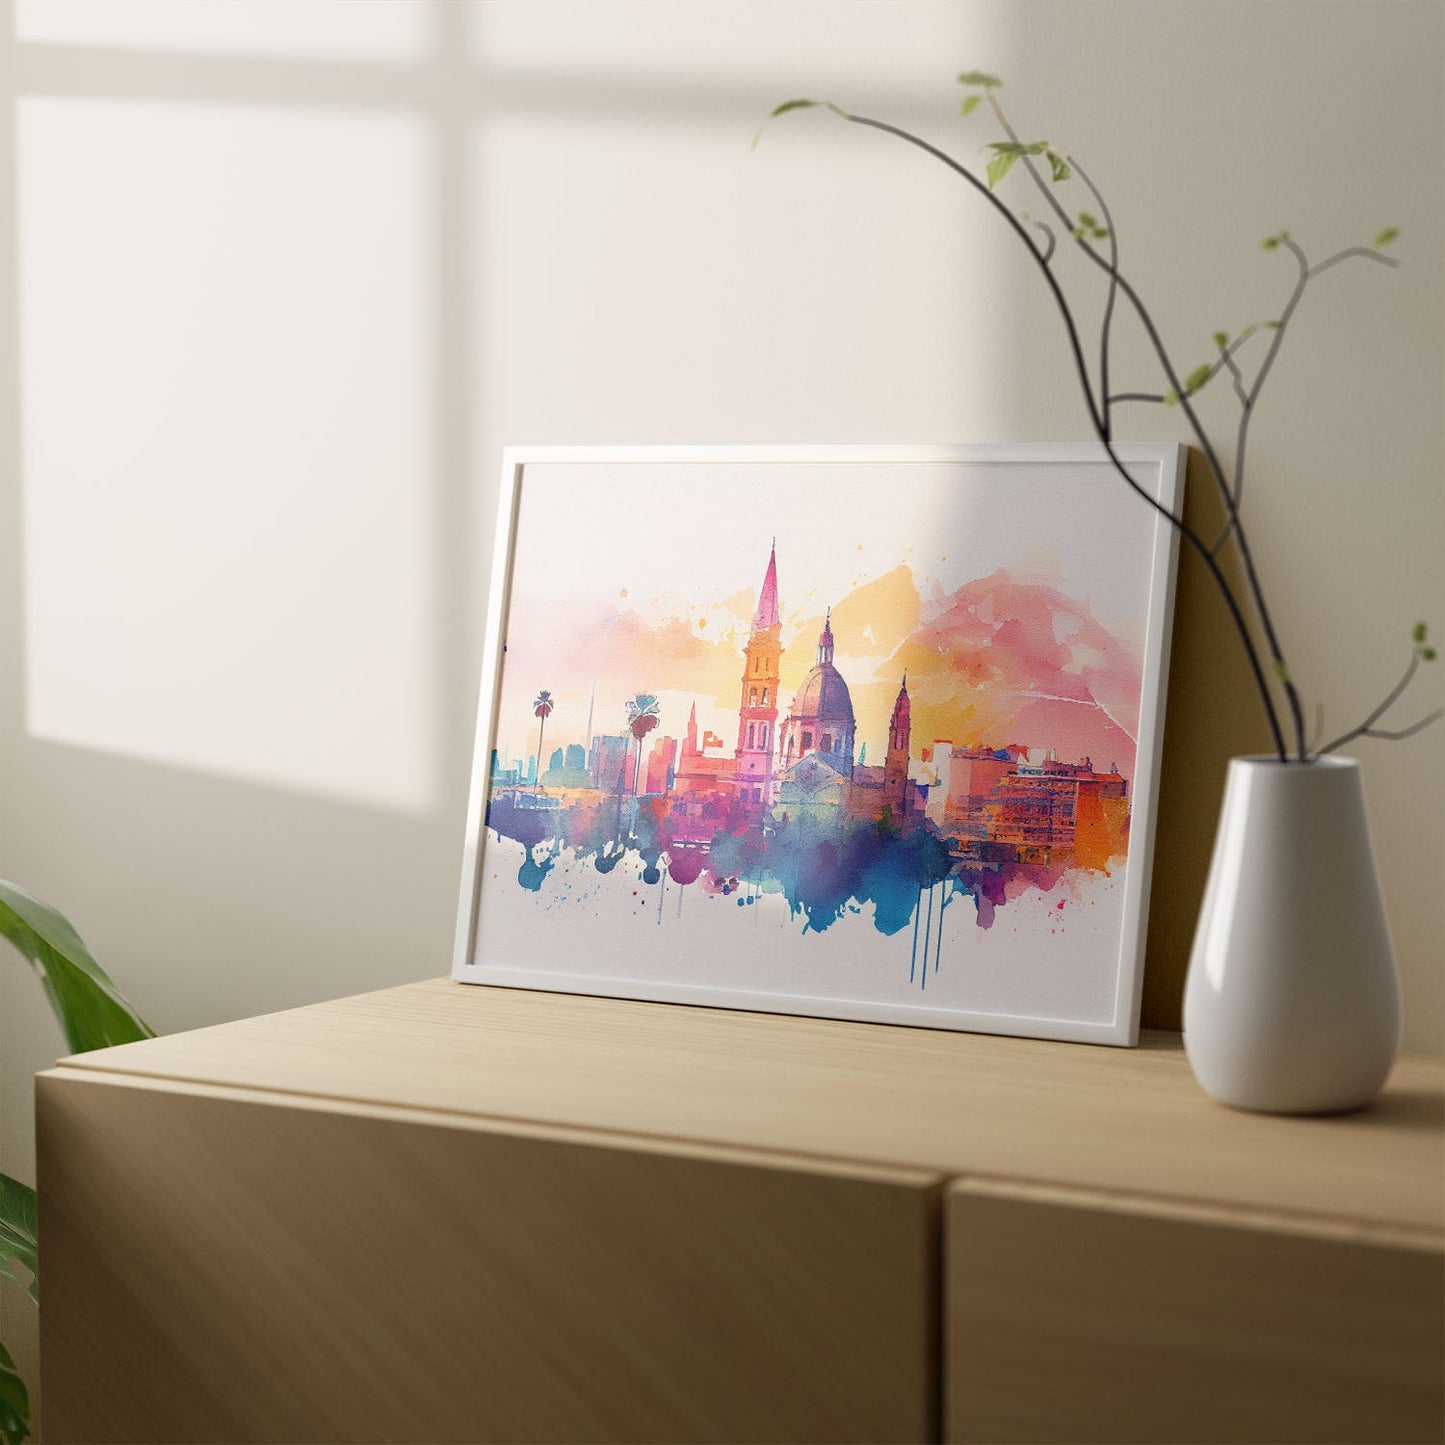 Nacnic watercolor of a skyline of the city of Valencia_1. Aesthetic Wall Art Prints for Bedroom or Living Room Design.